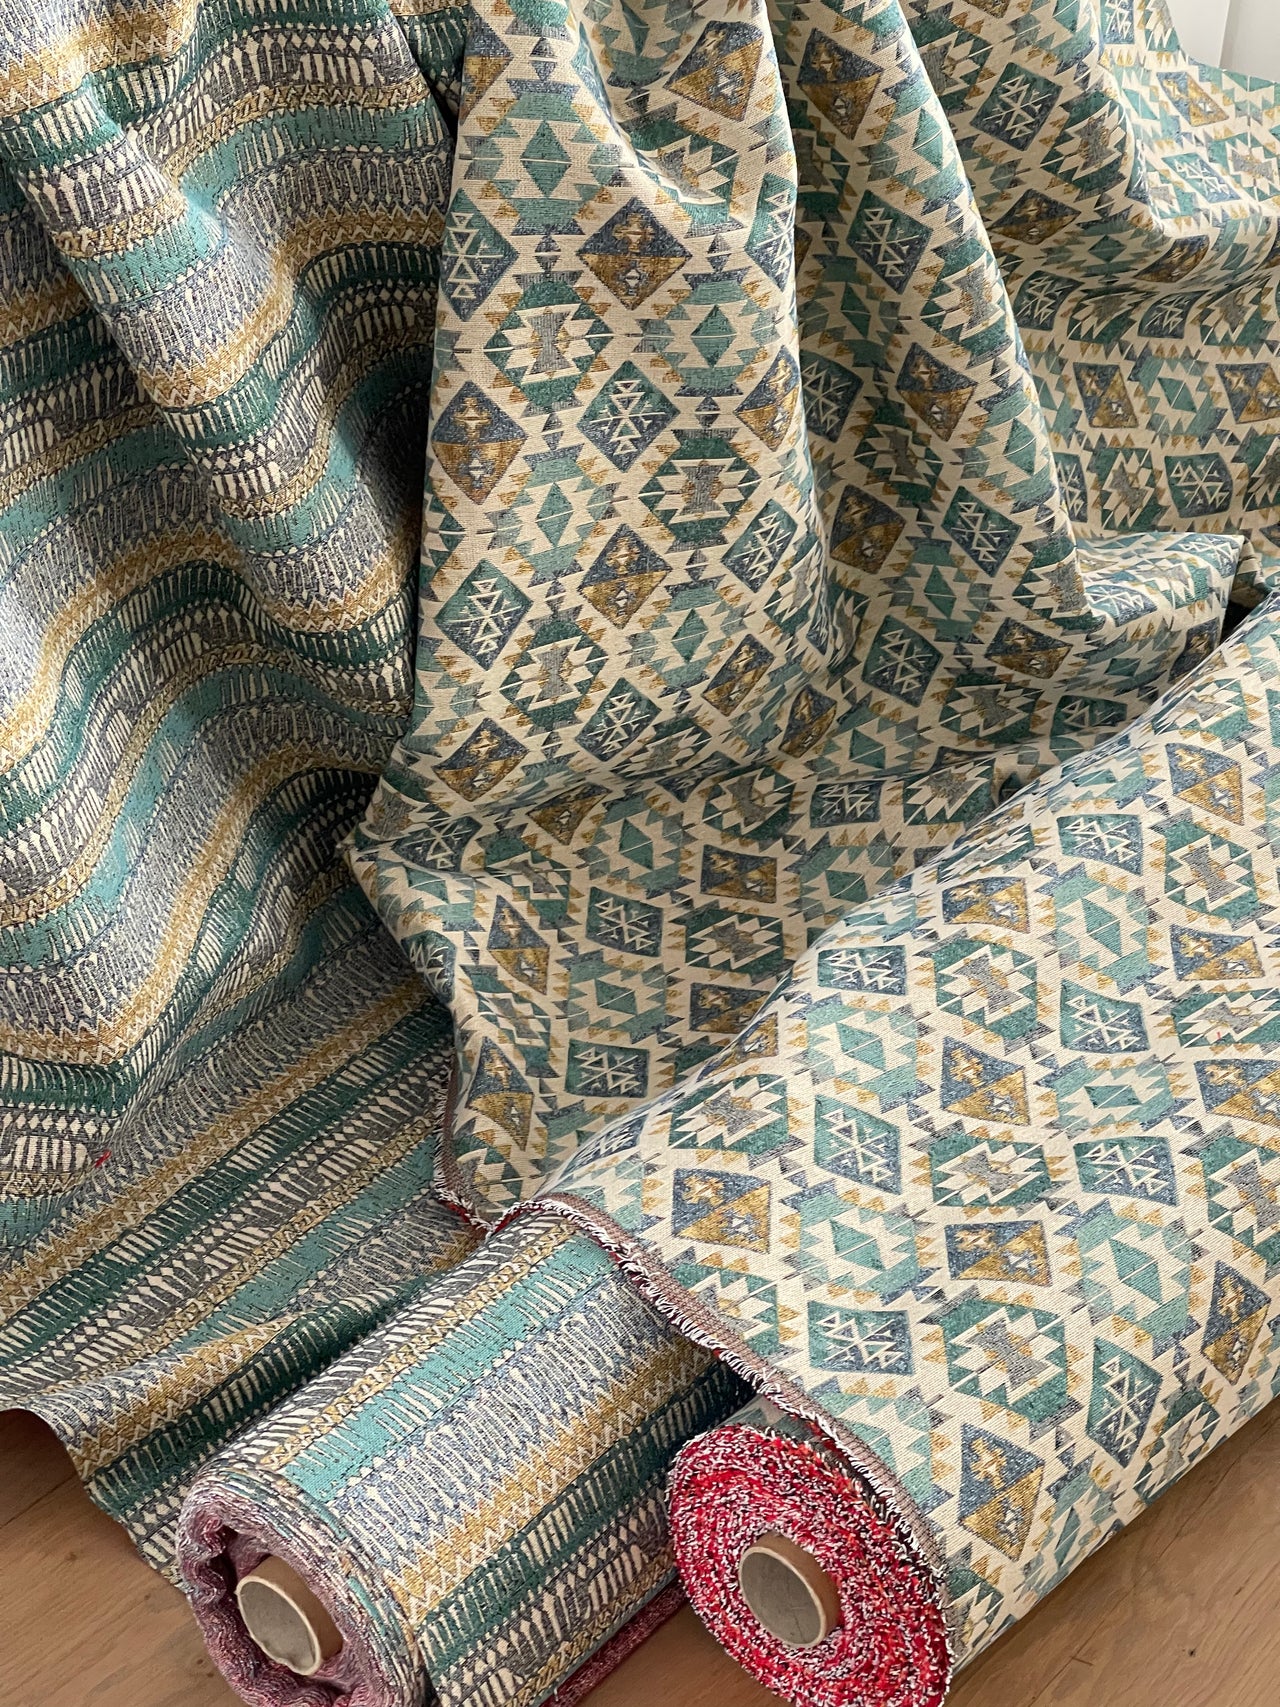 Moroccan-Inspired Kilim Afghan Old Rug: Blue, Yellow, and Green Stripes - Elevate Your Unique Home Decor - Sold by the Metre